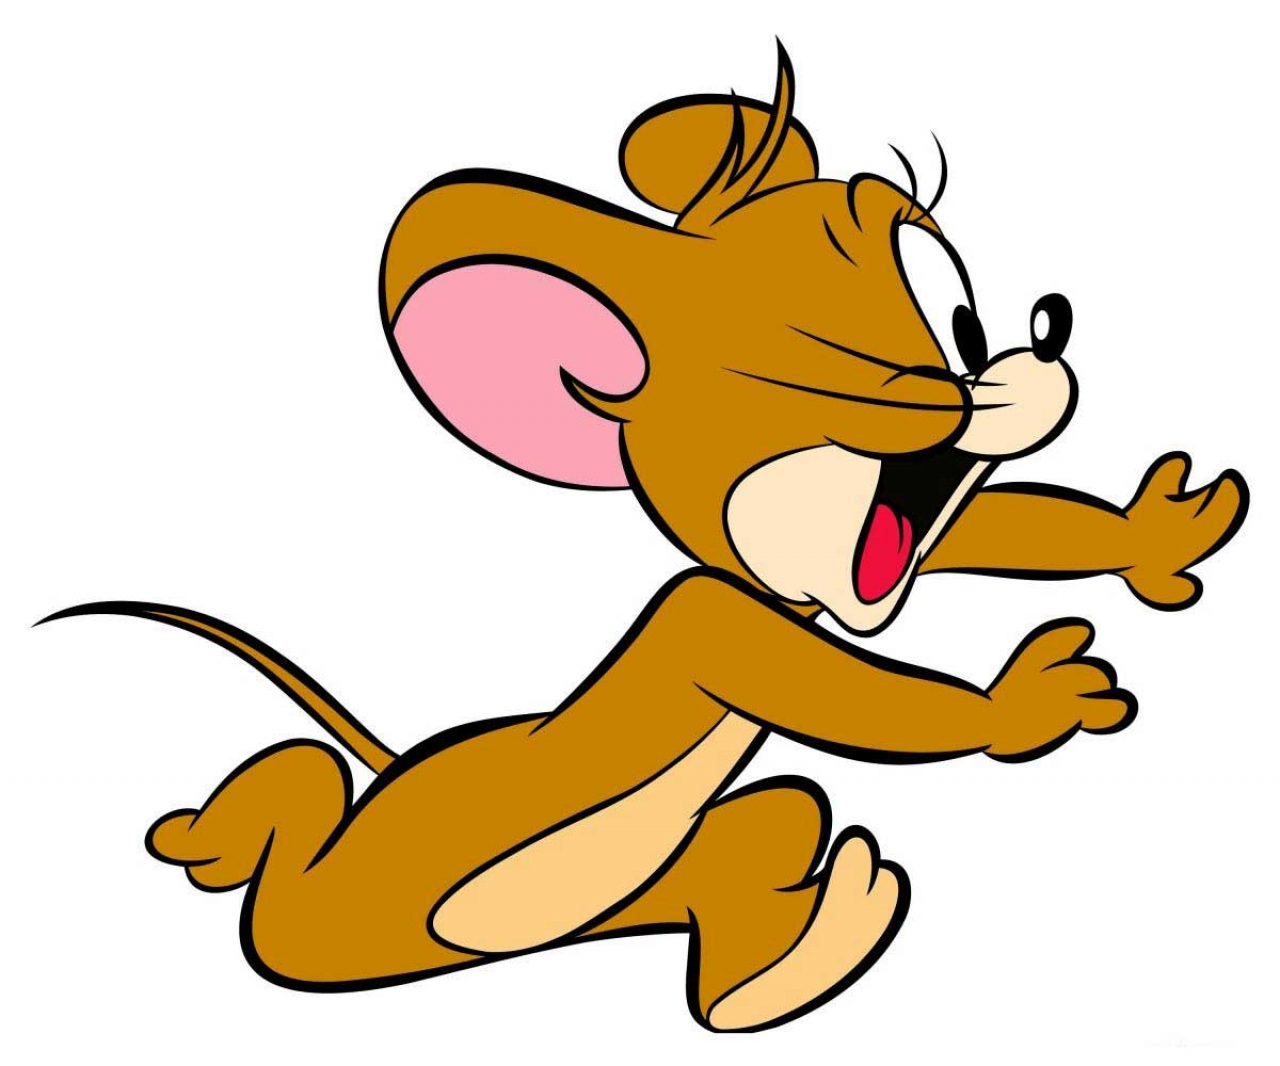 Mice Pictures Cartoon - ClipArt Best